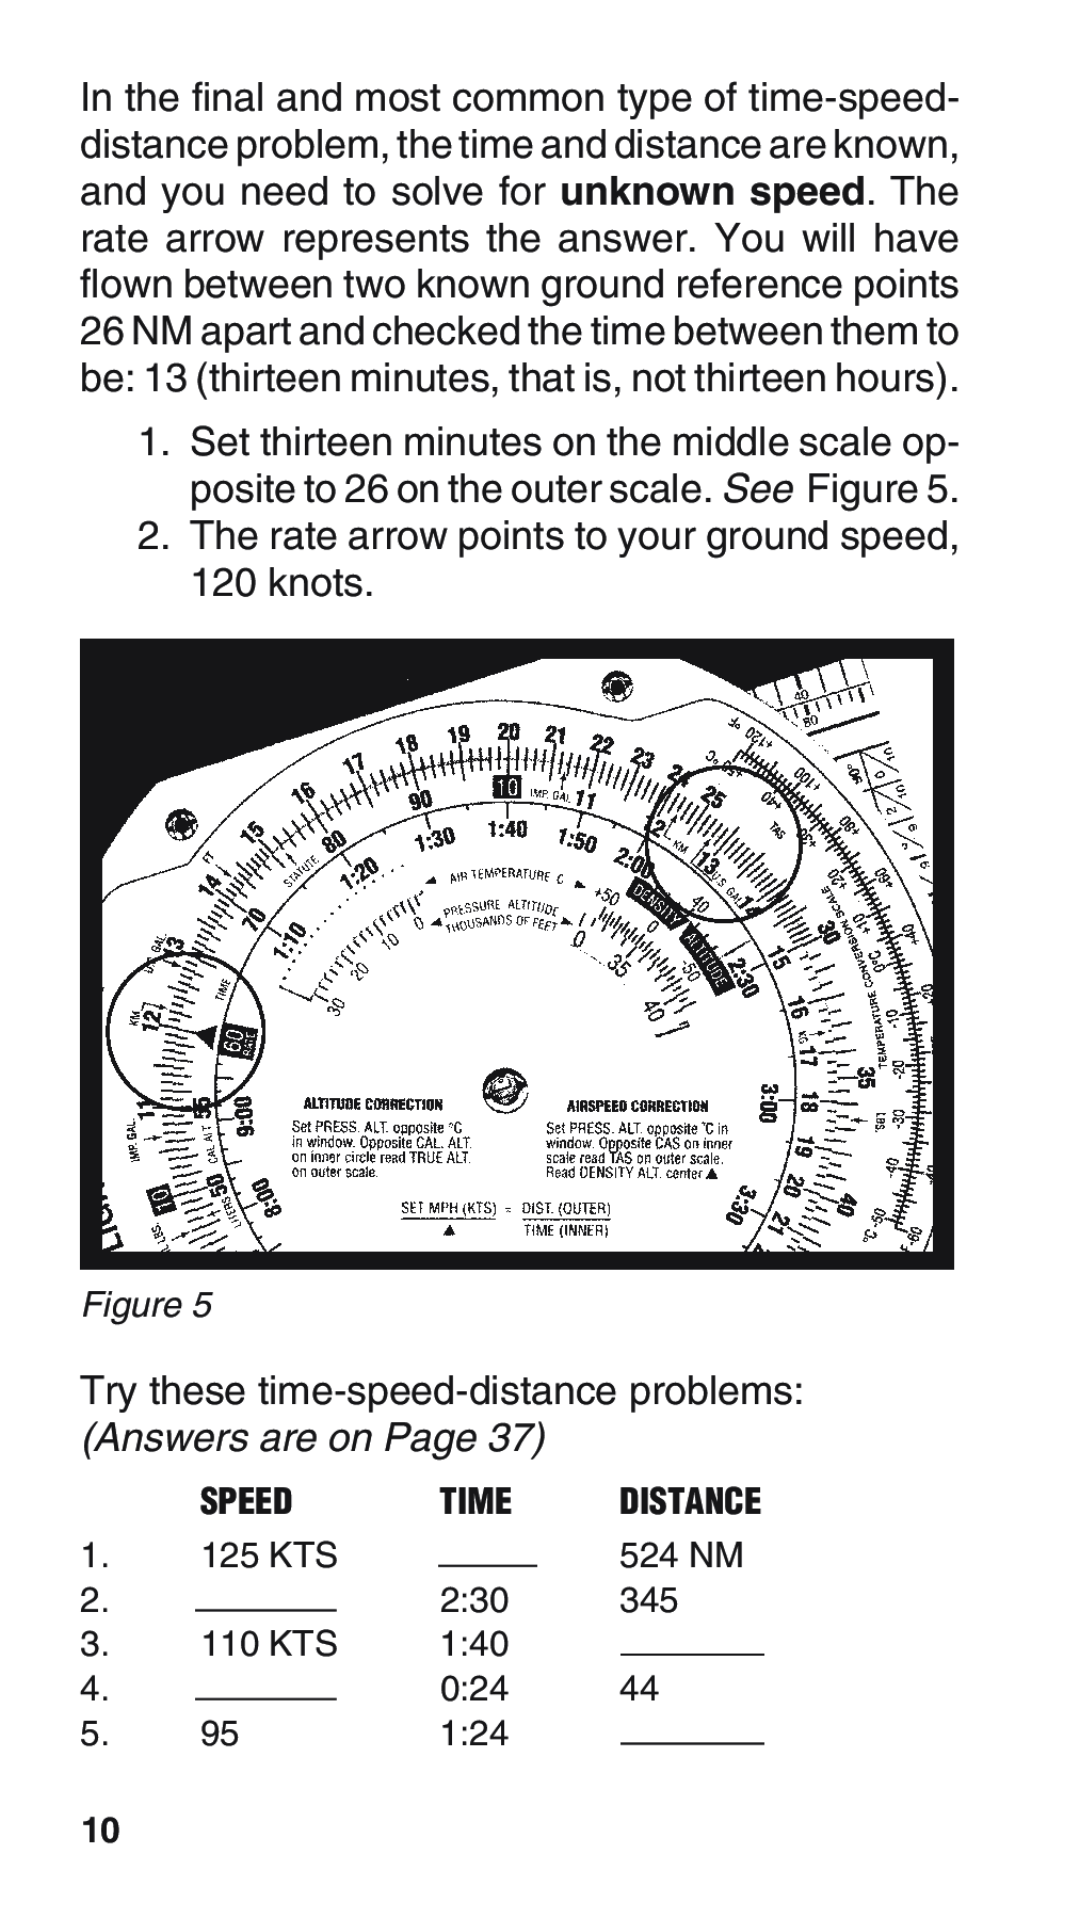 ASA Electronics E6-B manual The rate arrow points to your ground speed, 120 knots, Speed, Time 